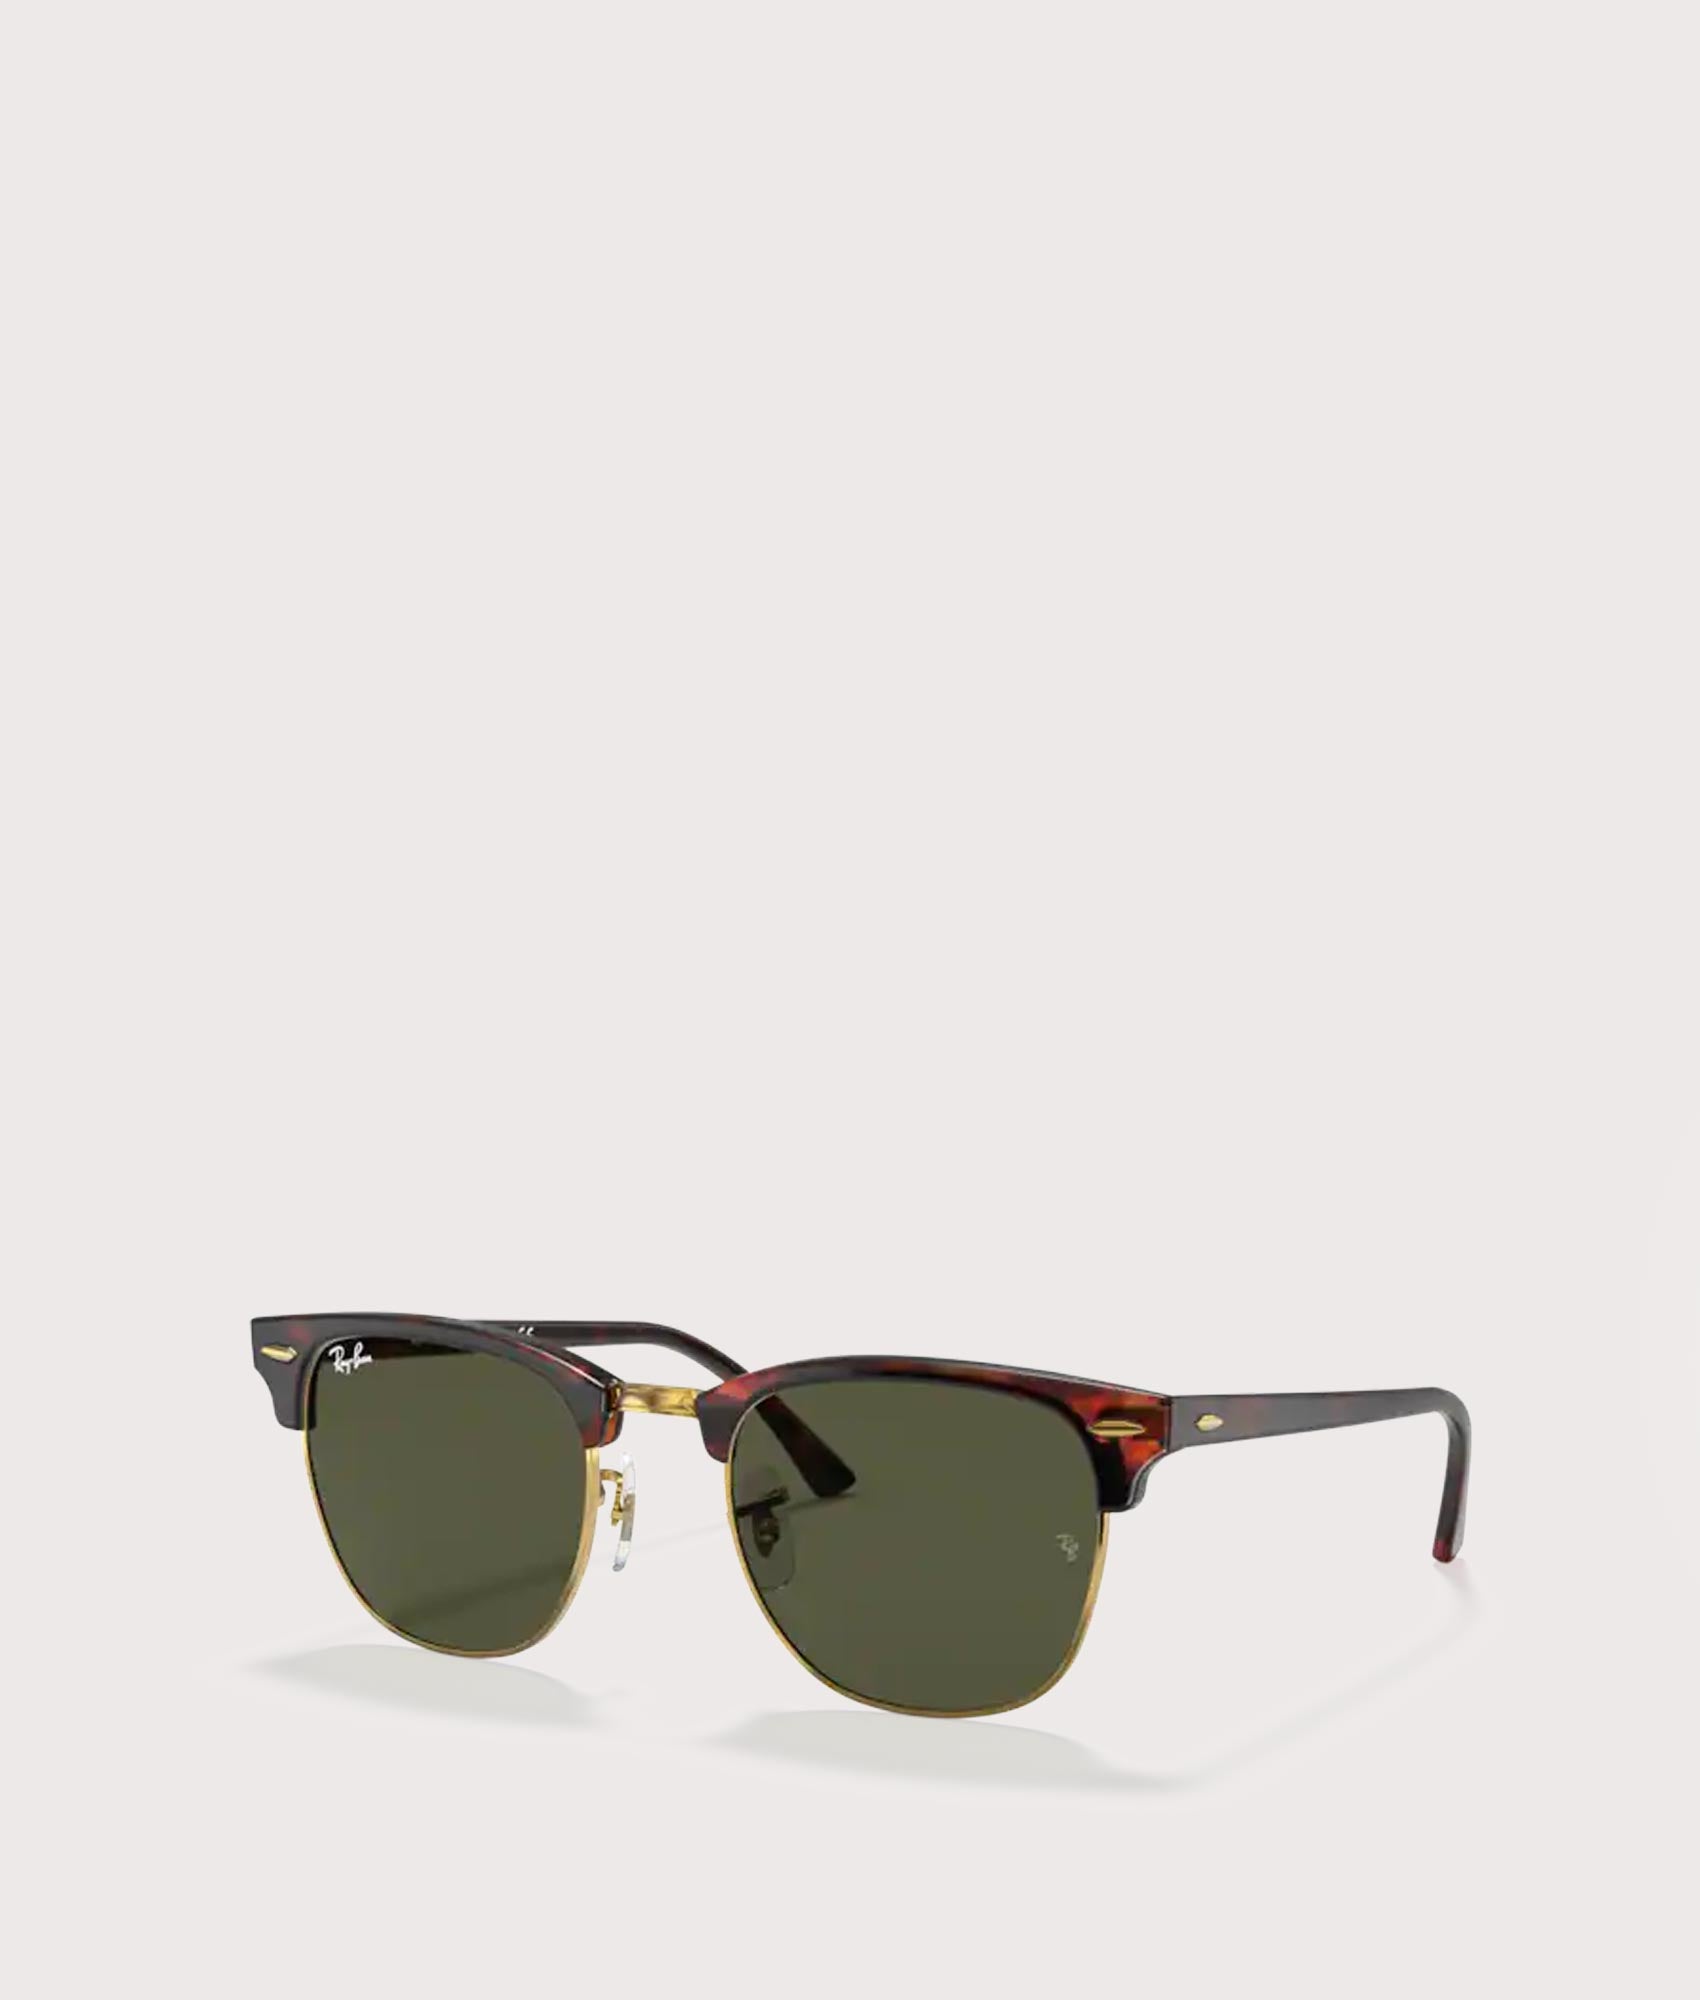 Ray-Ban Mens Clubmaster Classic Sunglasses - Colour: W0366 Polished Tortoise on Gold-Green Lens - Si